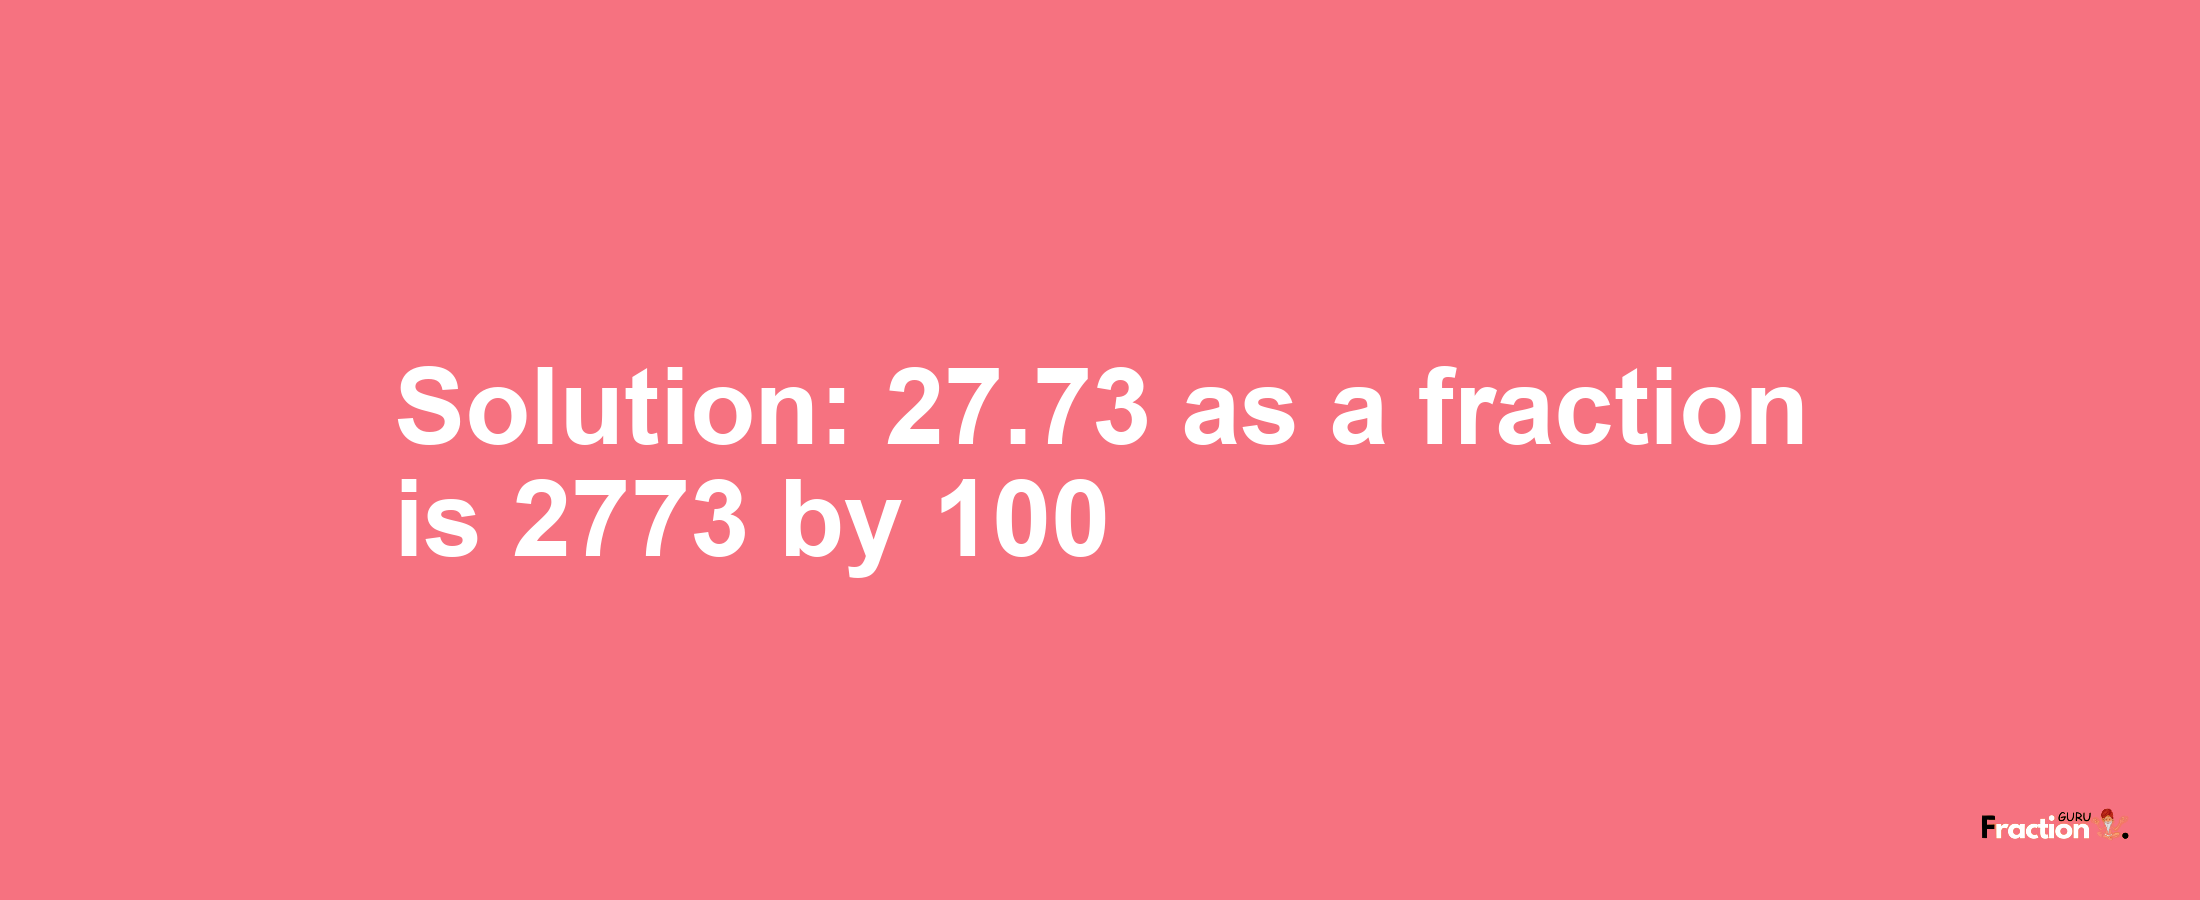 Solution:27.73 as a fraction is 2773/100